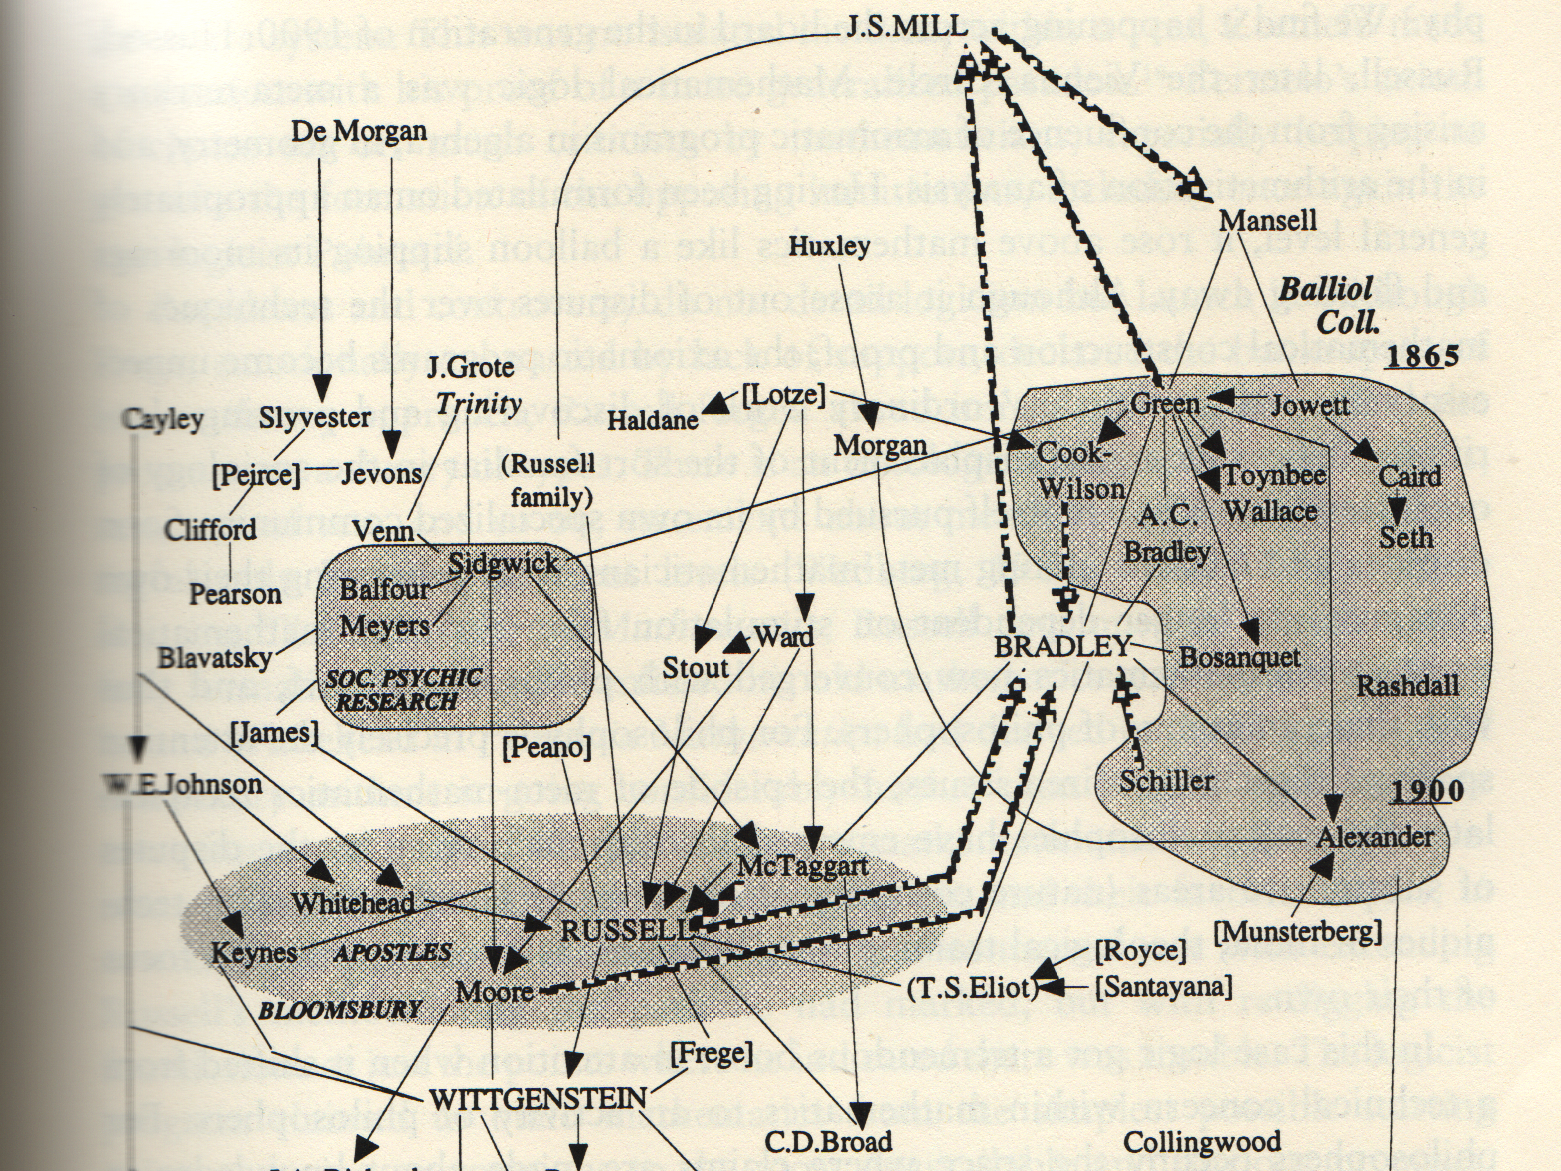 Sample of Mapping Intellectual Engagement British Philosophers and Mathematicians 1865-1935 Source: Randall Collins. The Sociology of Philosophies. A Global Theory of Intellectual Change. Cambridge, Massachusetts. The Belknap Press of Harvard University Press. 1998. p. 711.